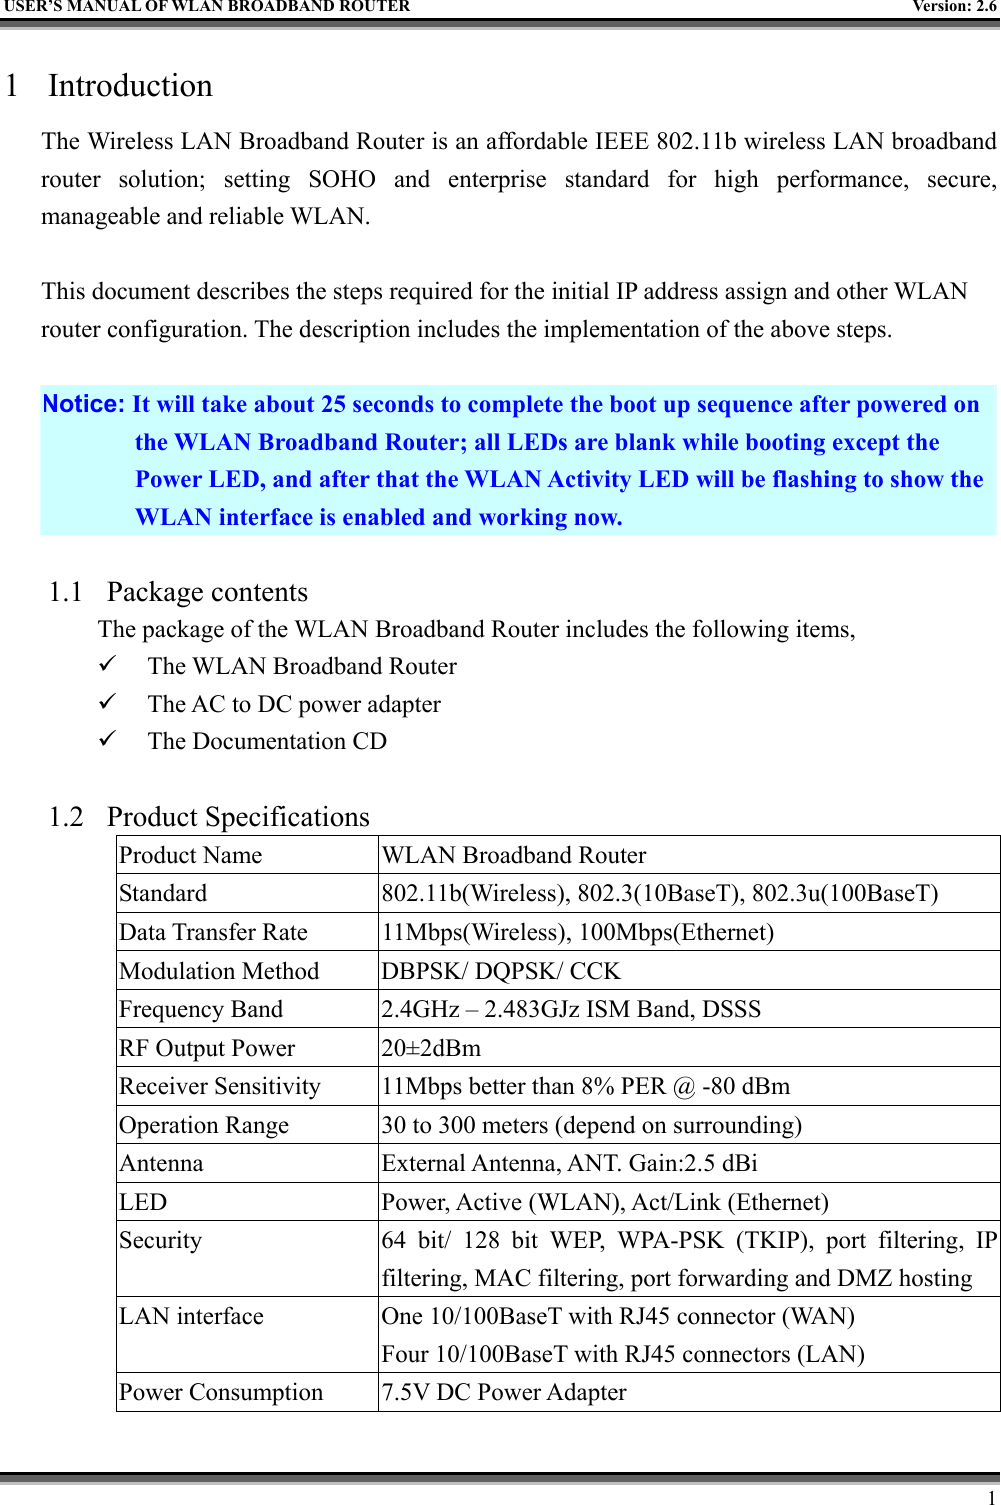   USER’S MANUAL OF WLAN BROADBAND ROUTER    Version: 2.6     1 1 Introduction The Wireless LAN Broadband Router is an affordable IEEE 802.11b wireless LAN broadband router solution; setting SOHO and enterprise standard for high performance, secure, manageable and reliable WLAN.  This document describes the steps required for the initial IP address assign and other WLAN router configuration. The description includes the implementation of the above steps.  Notice: It will take about 25 seconds to complete the boot up sequence after powered on the WLAN Broadband Router; all LEDs are blank while booting except the Power LED, and after that the WLAN Activity LED will be flashing to show the WLAN interface is enabled and working now.  1.1 Package contents The package of the WLAN Broadband Router includes the following items,   The WLAN Broadband Router   The AC to DC power adapter   The Documentation CD  1.2 Product Specifications Product Name  WLAN Broadband Router Standard  802.11b(Wireless), 802.3(10BaseT), 802.3u(100BaseT) Data Transfer Rate  11Mbps(Wireless), 100Mbps(Ethernet) Modulation Method  DBPSK/ DQPSK/ CCK Frequency Band  2.4GHz – 2.483GJz ISM Band, DSSS RF Output Power  20±2dBm Receiver Sensitivity  11Mbps better than 8% PER @ -80 dBm Operation Range  30 to 300 meters (depend on surrounding) Antenna  External Antenna, ANT. Gain:2.5 dBi LED  Power, Active (WLAN), Act/Link (Ethernet) Security  64 bit/ 128 bit WEP, WPA-PSK (TKIP), port filtering, IP filtering, MAC filtering, port forwarding and DMZ hosting LAN interface  One 10/100BaseT with RJ45 connector (WAN) Four 10/100BaseT with RJ45 connectors (LAN) Power Consumption  7.5V DC Power Adapter 